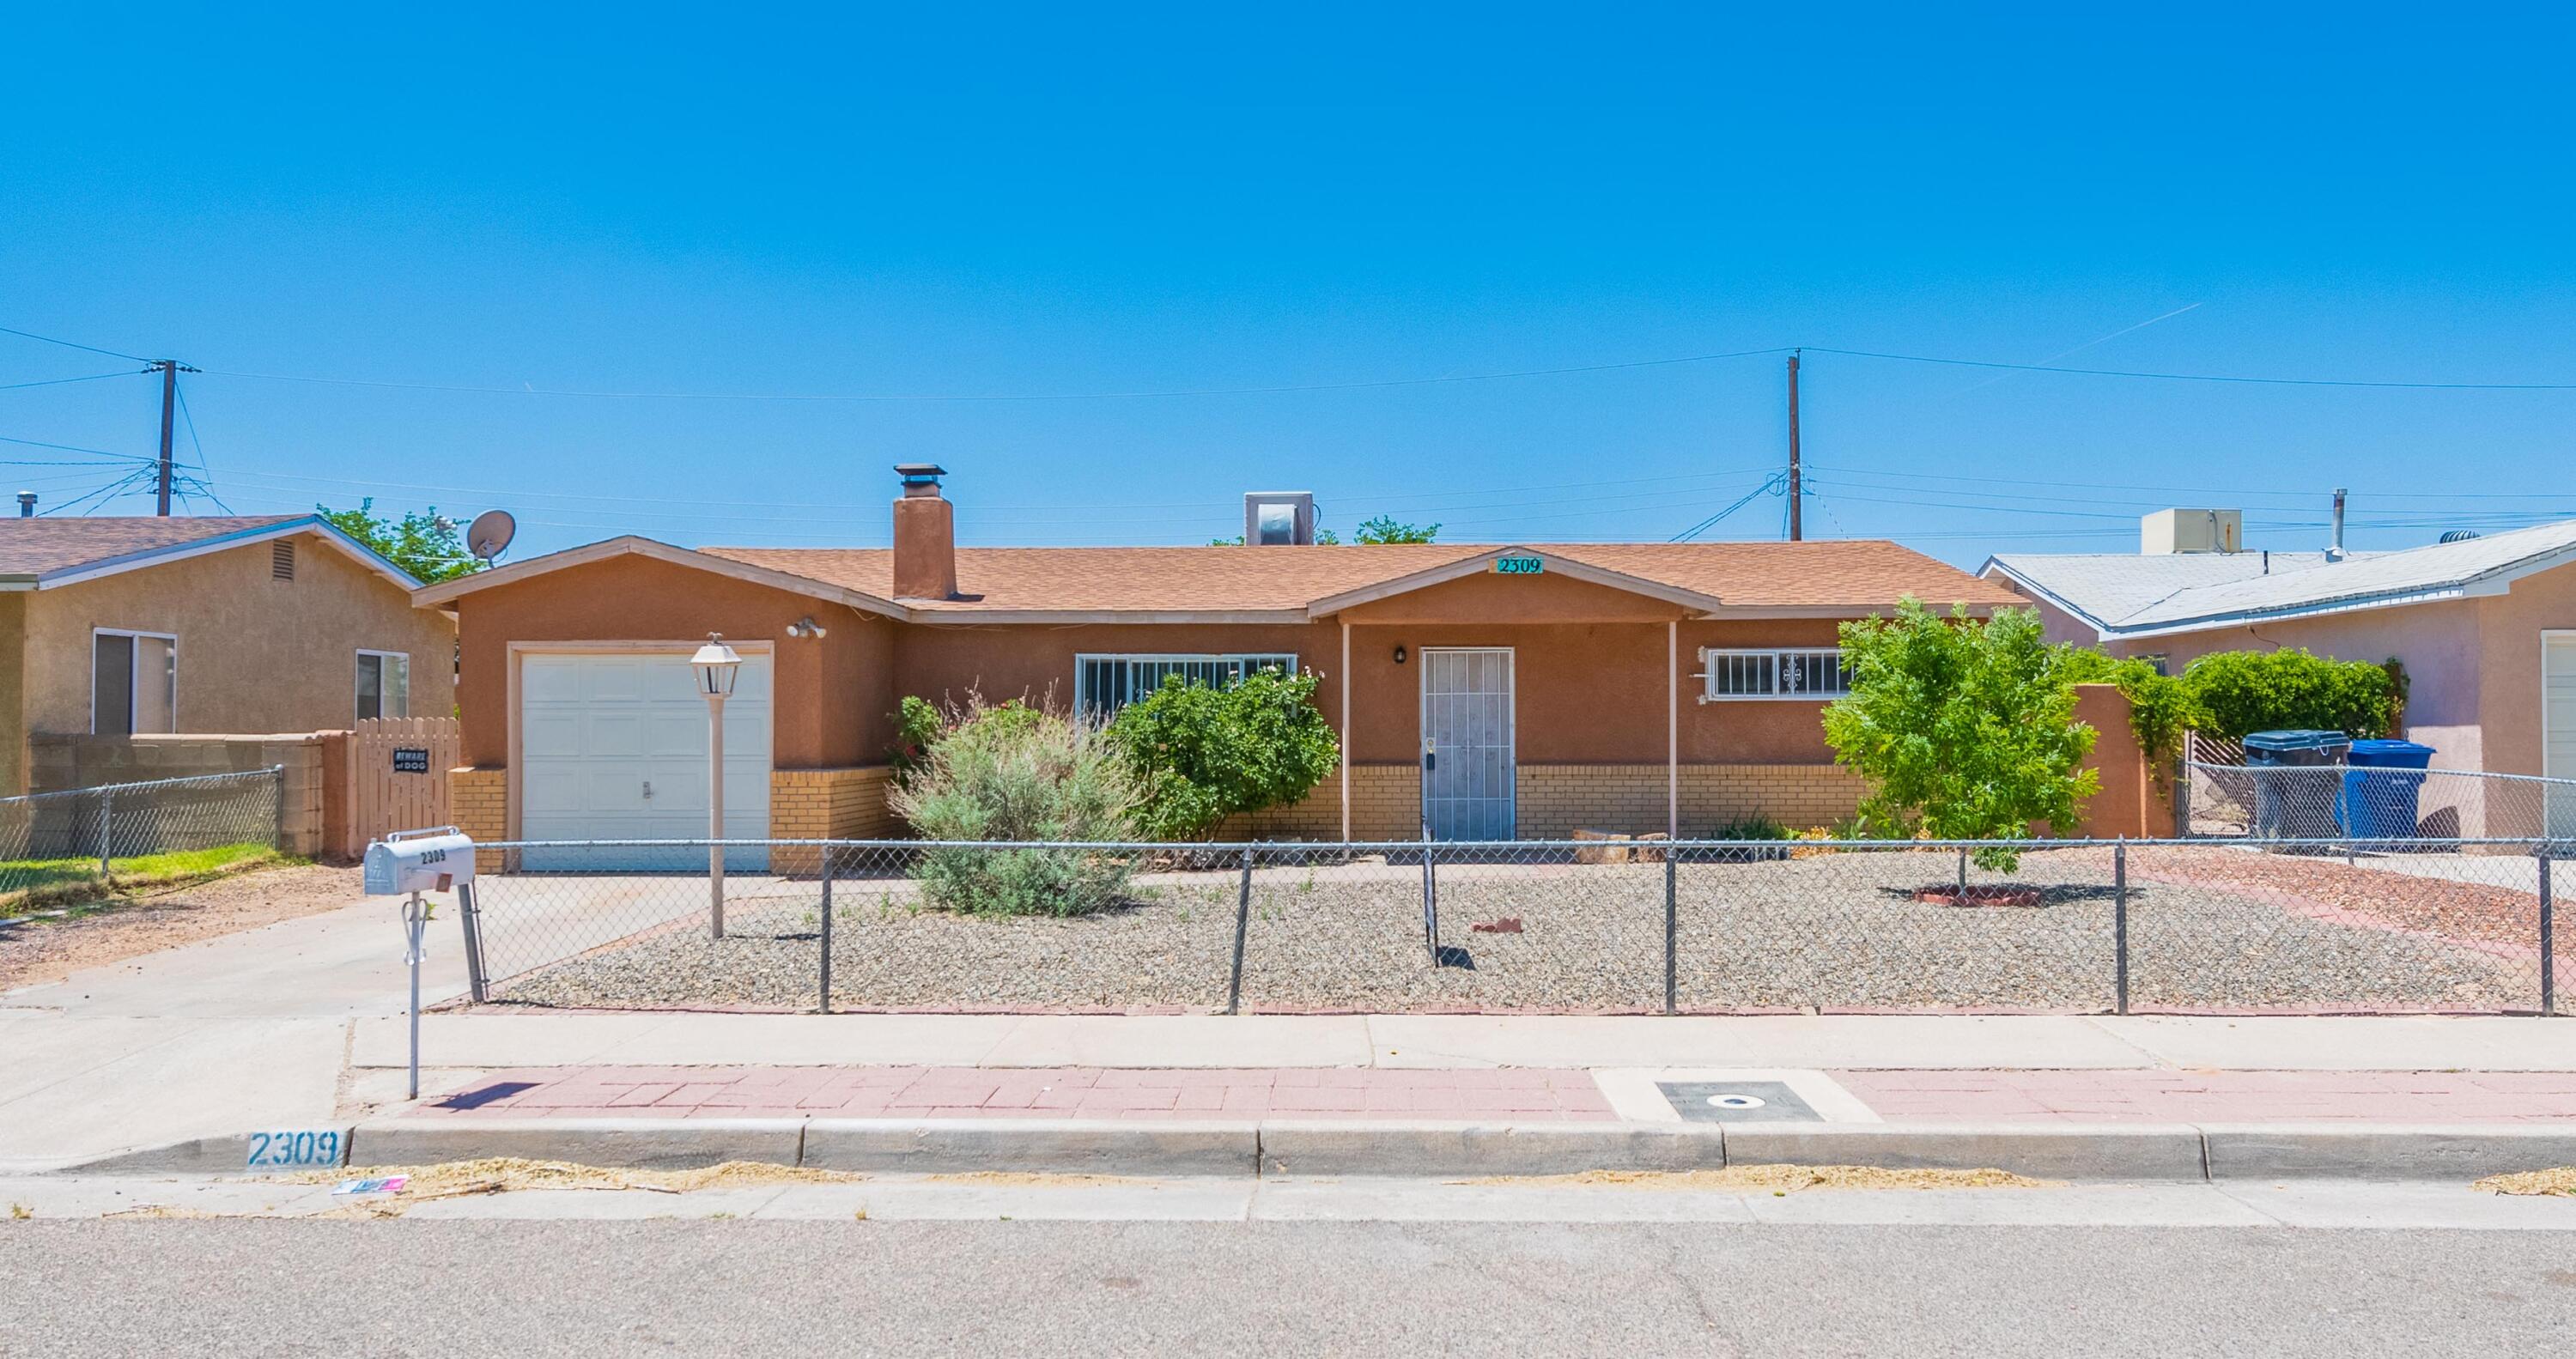 This wonderful home has 3 bedrooms, 2 bathrooms.  Large backyard and 1 car garage.  Located close to freeway and shopping centers.